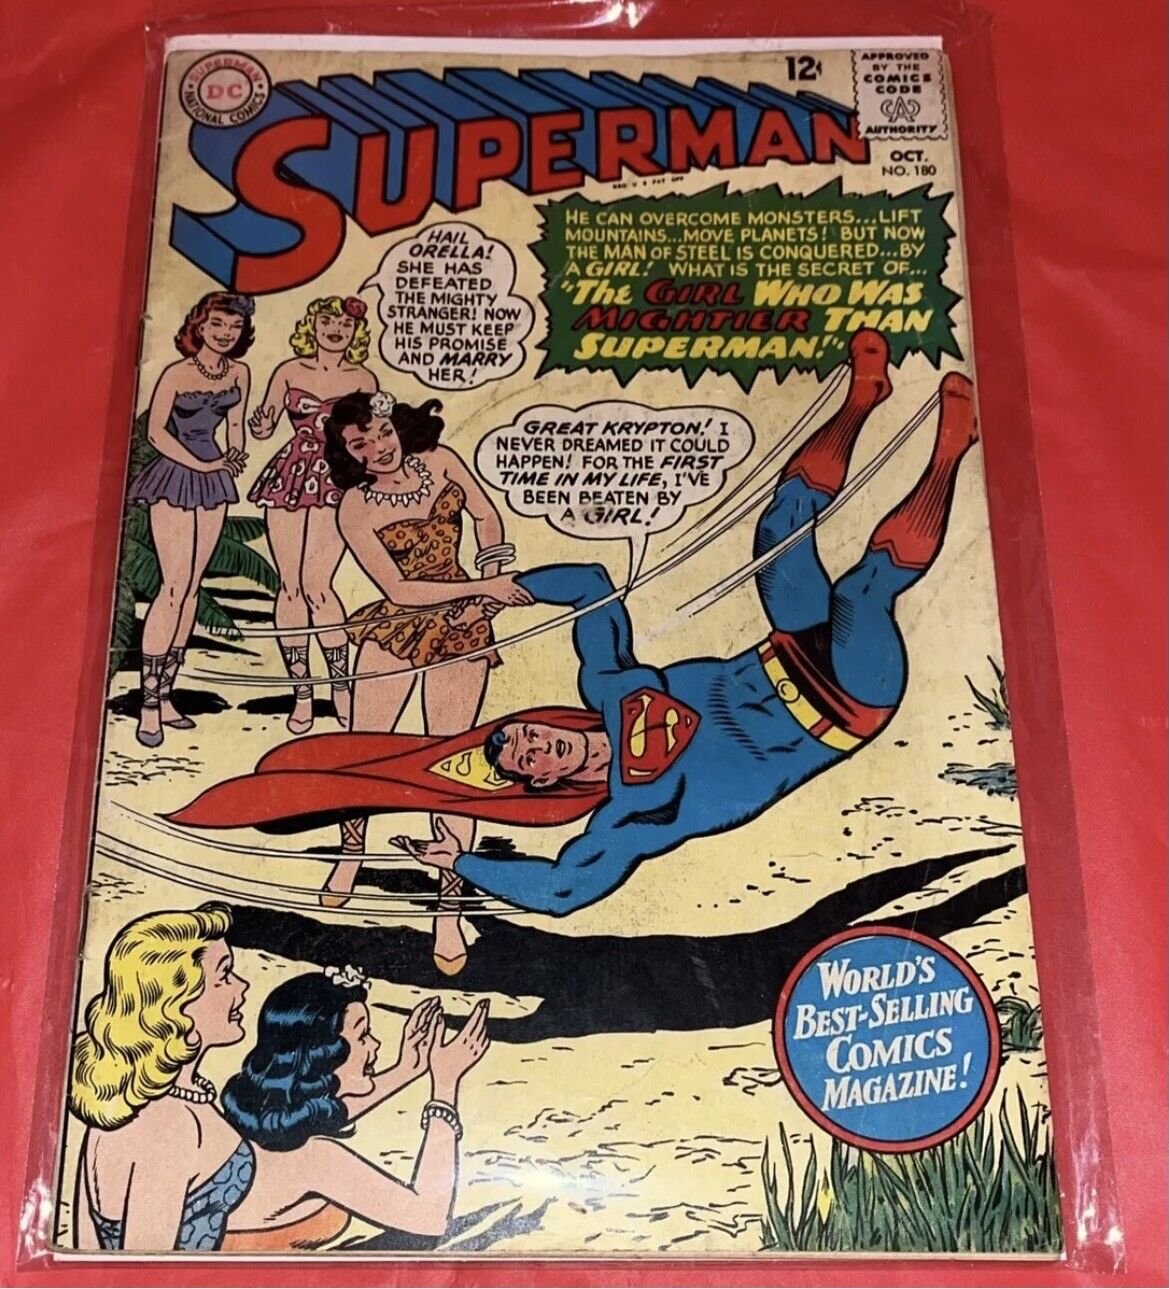 Superman #180 Oct 1965 Silver Age DC Comics, In Excellent Condition.